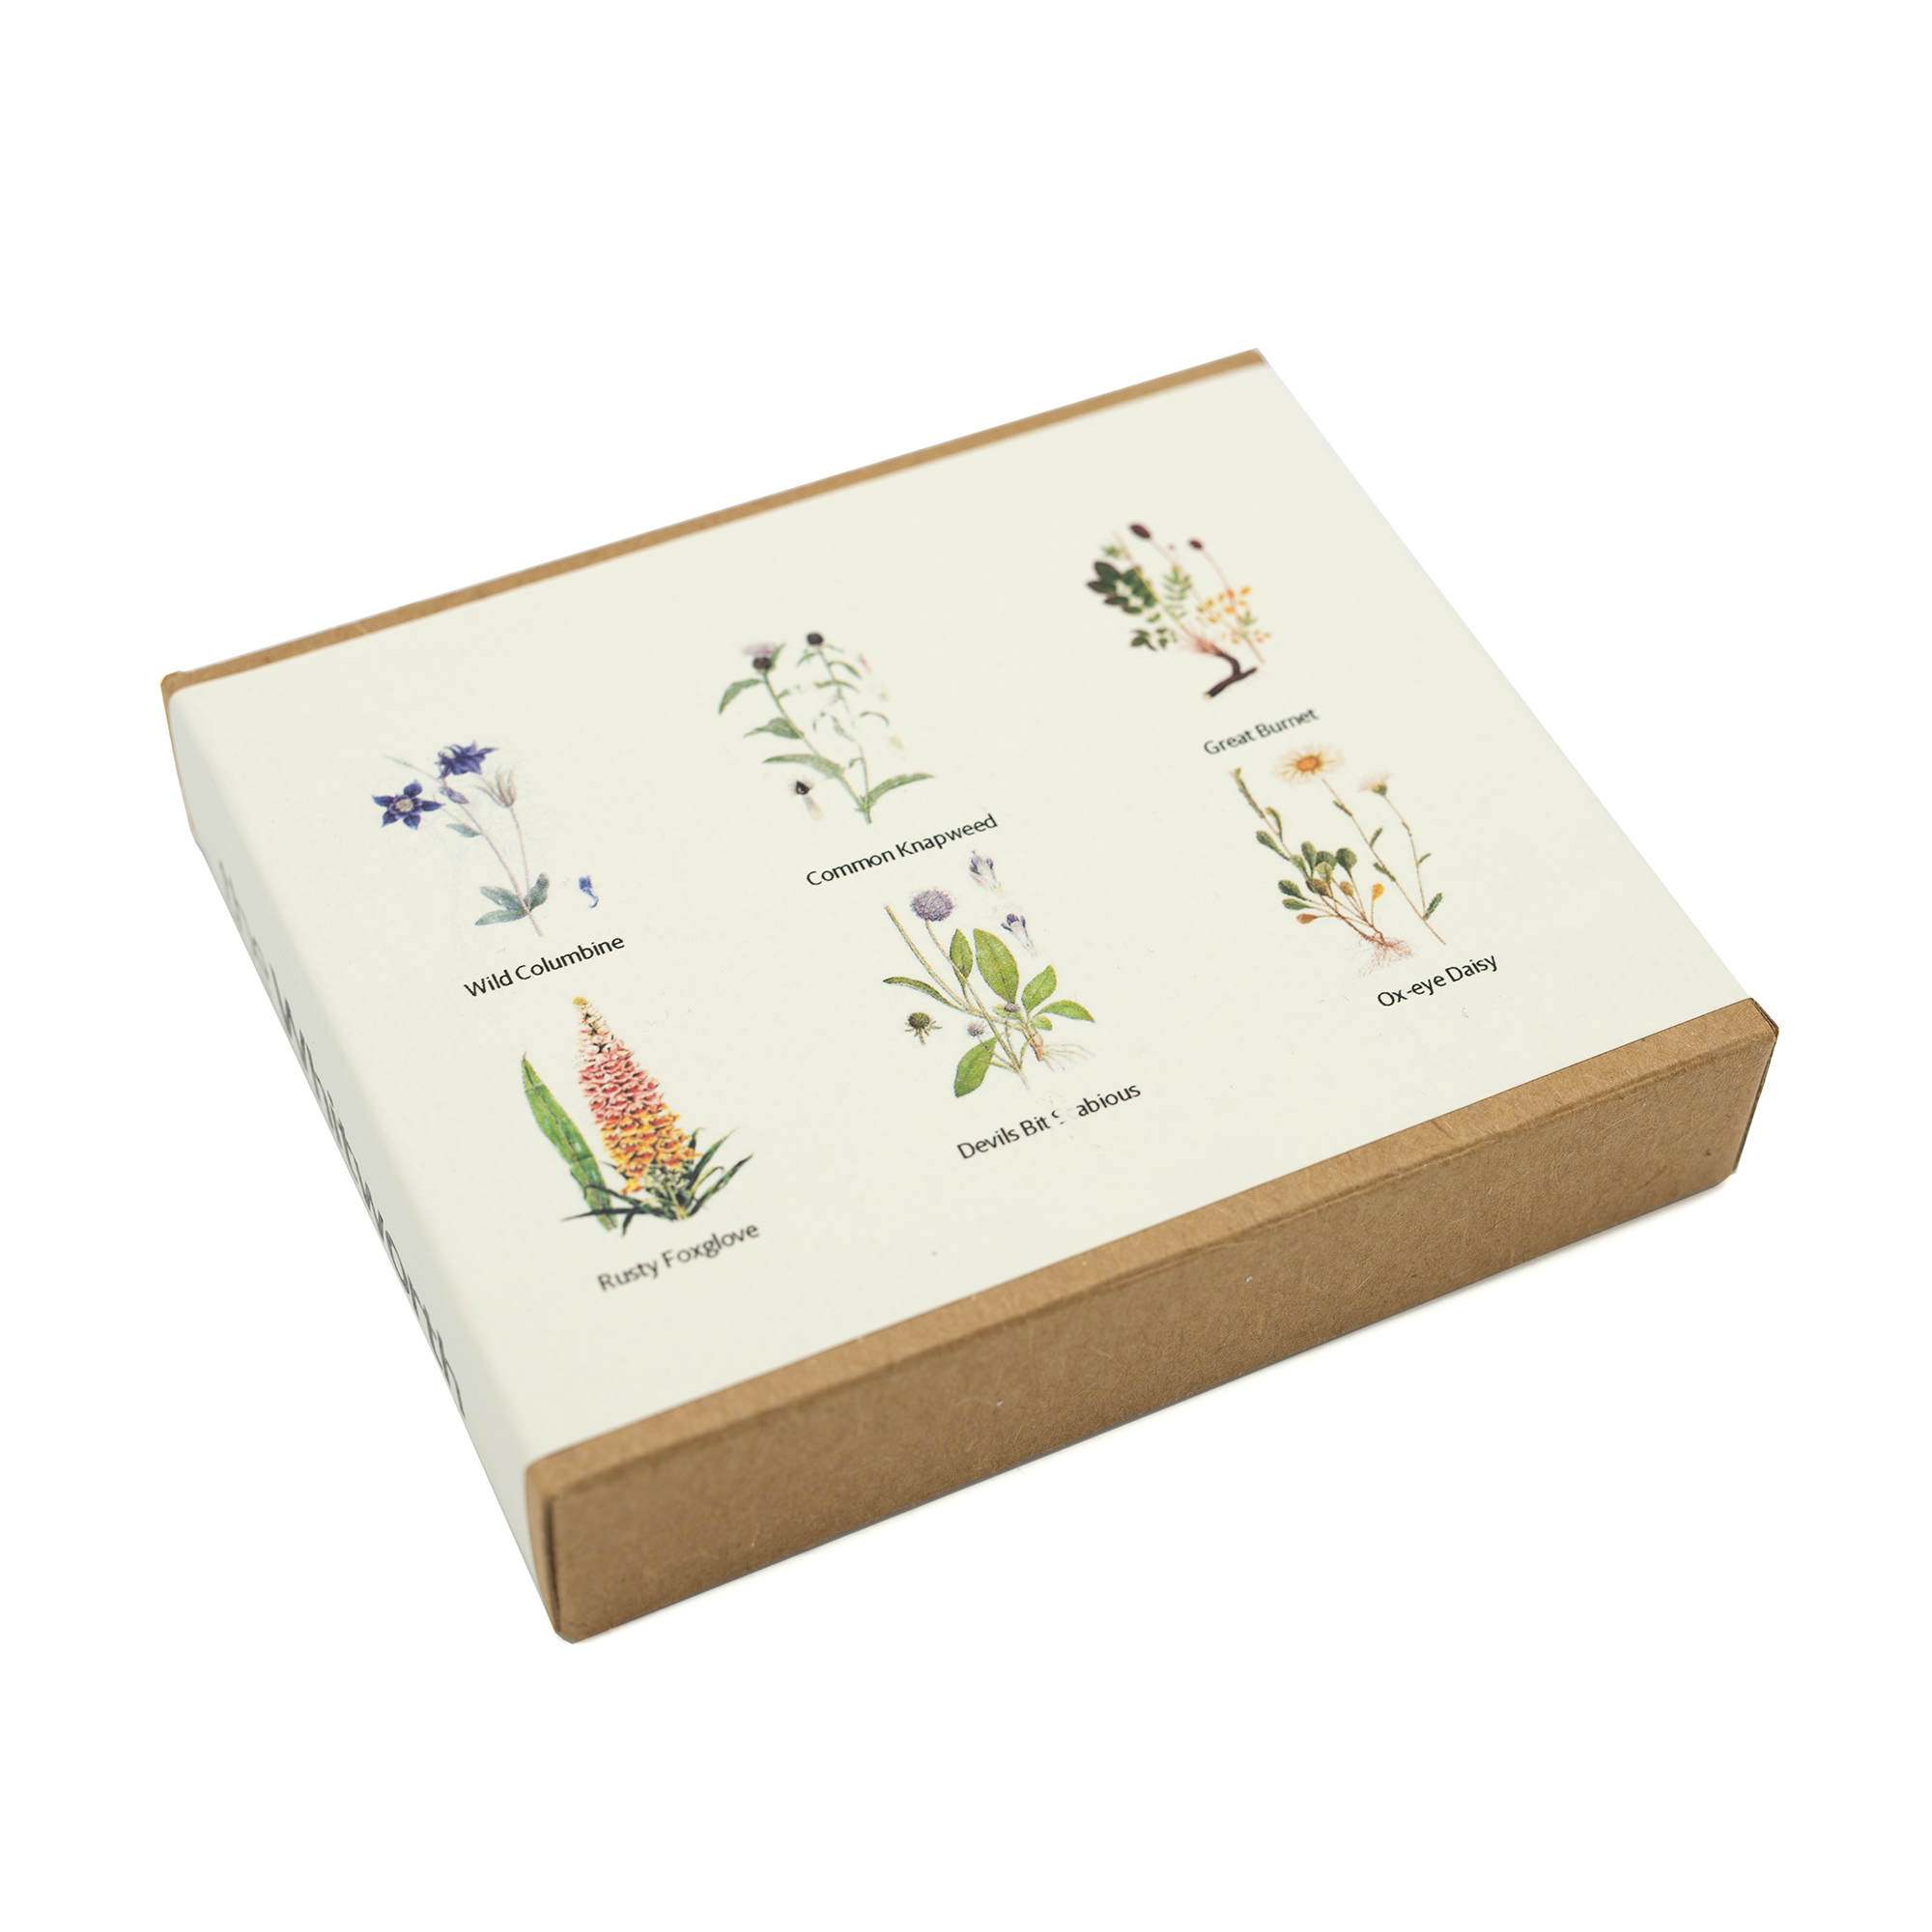 Whitworth Seed box photographed against a white background. Featuring the names of the seeds and illustrations of them.